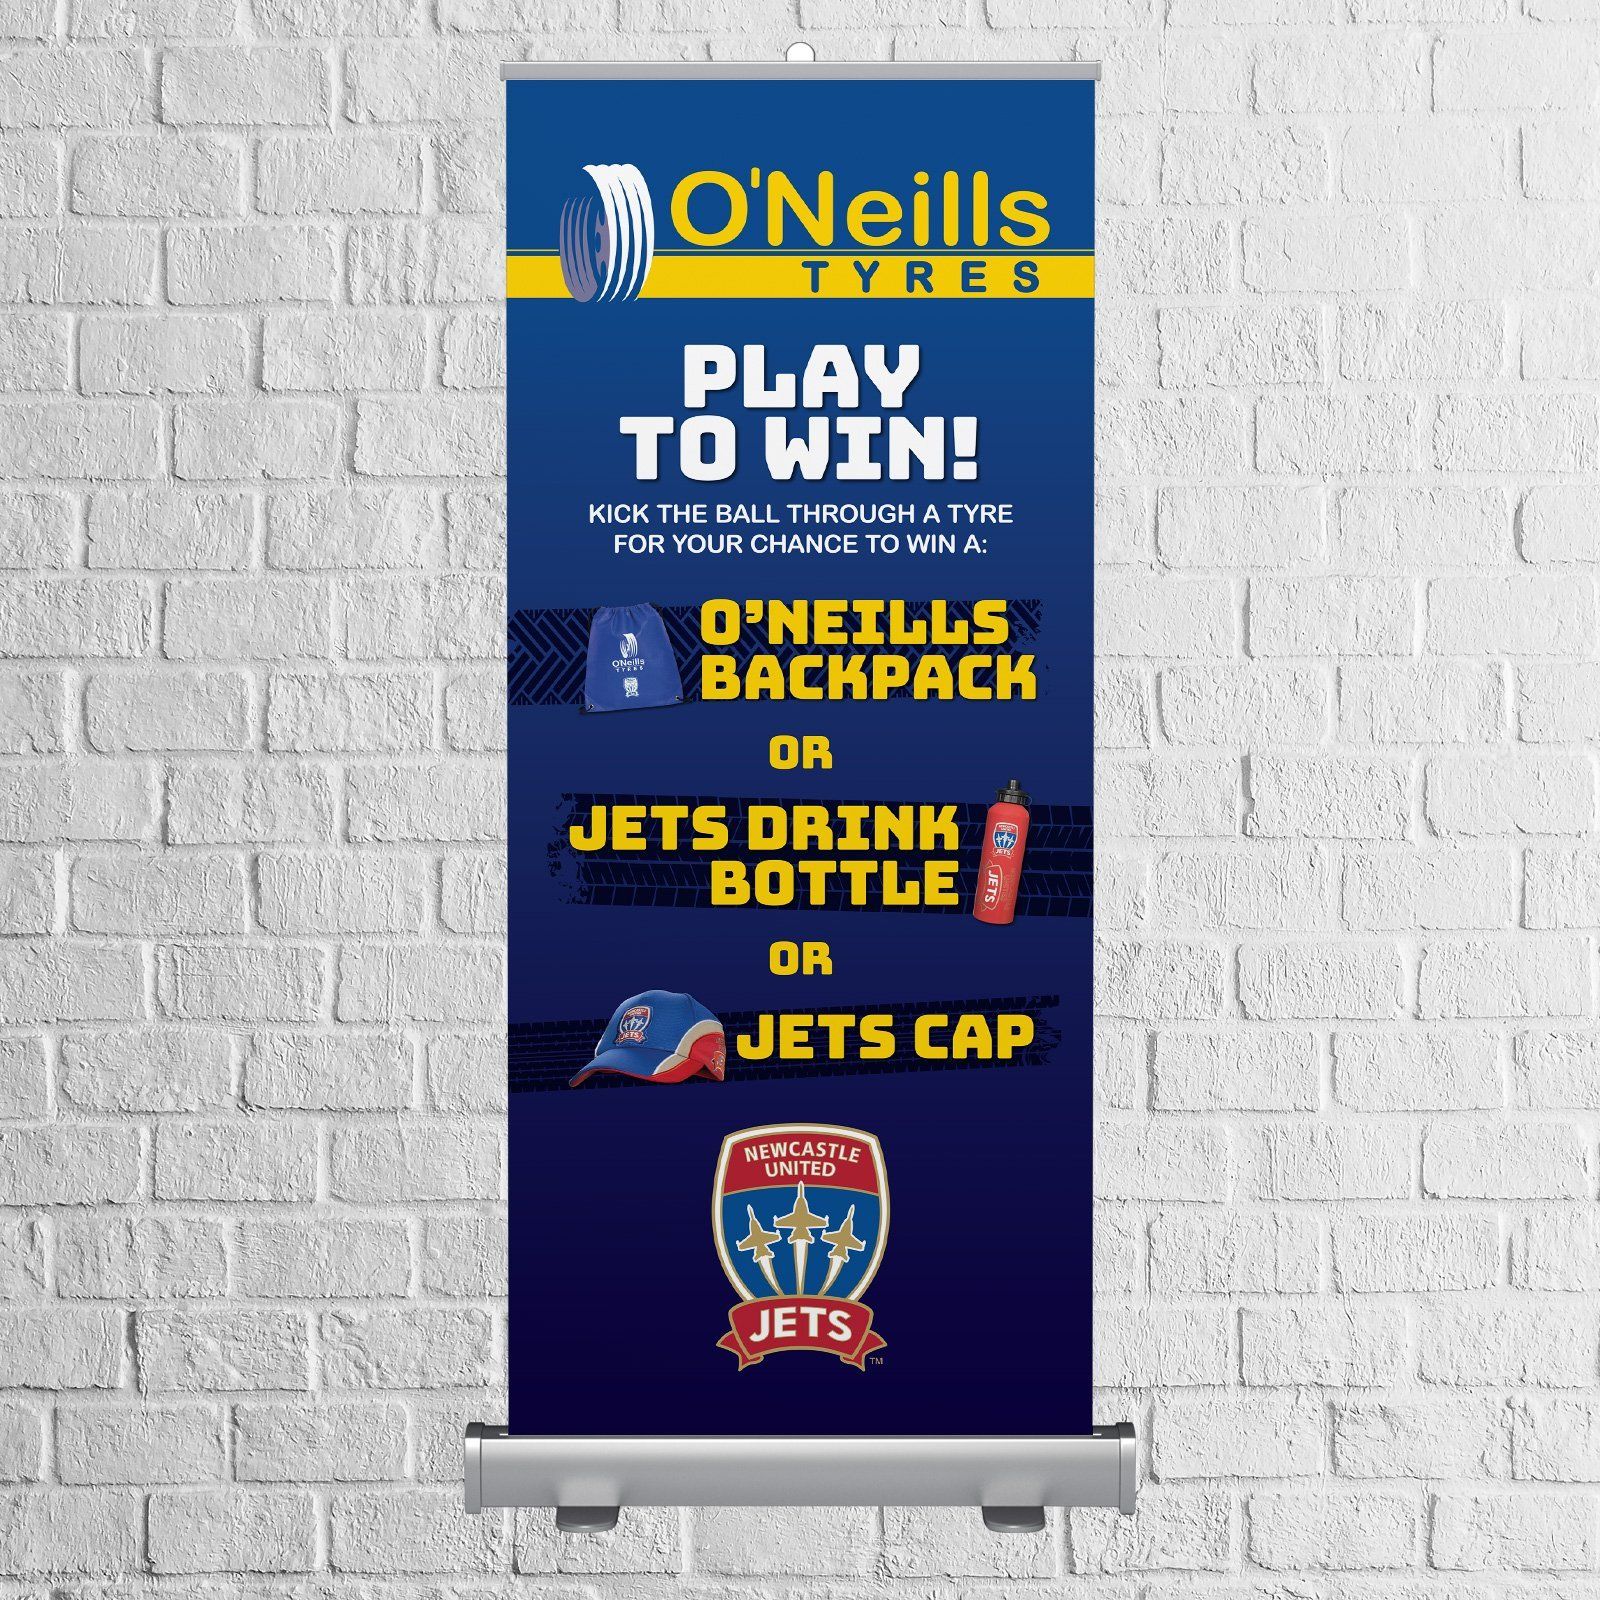 O'Neill's Tyres Event Pull Up Banner